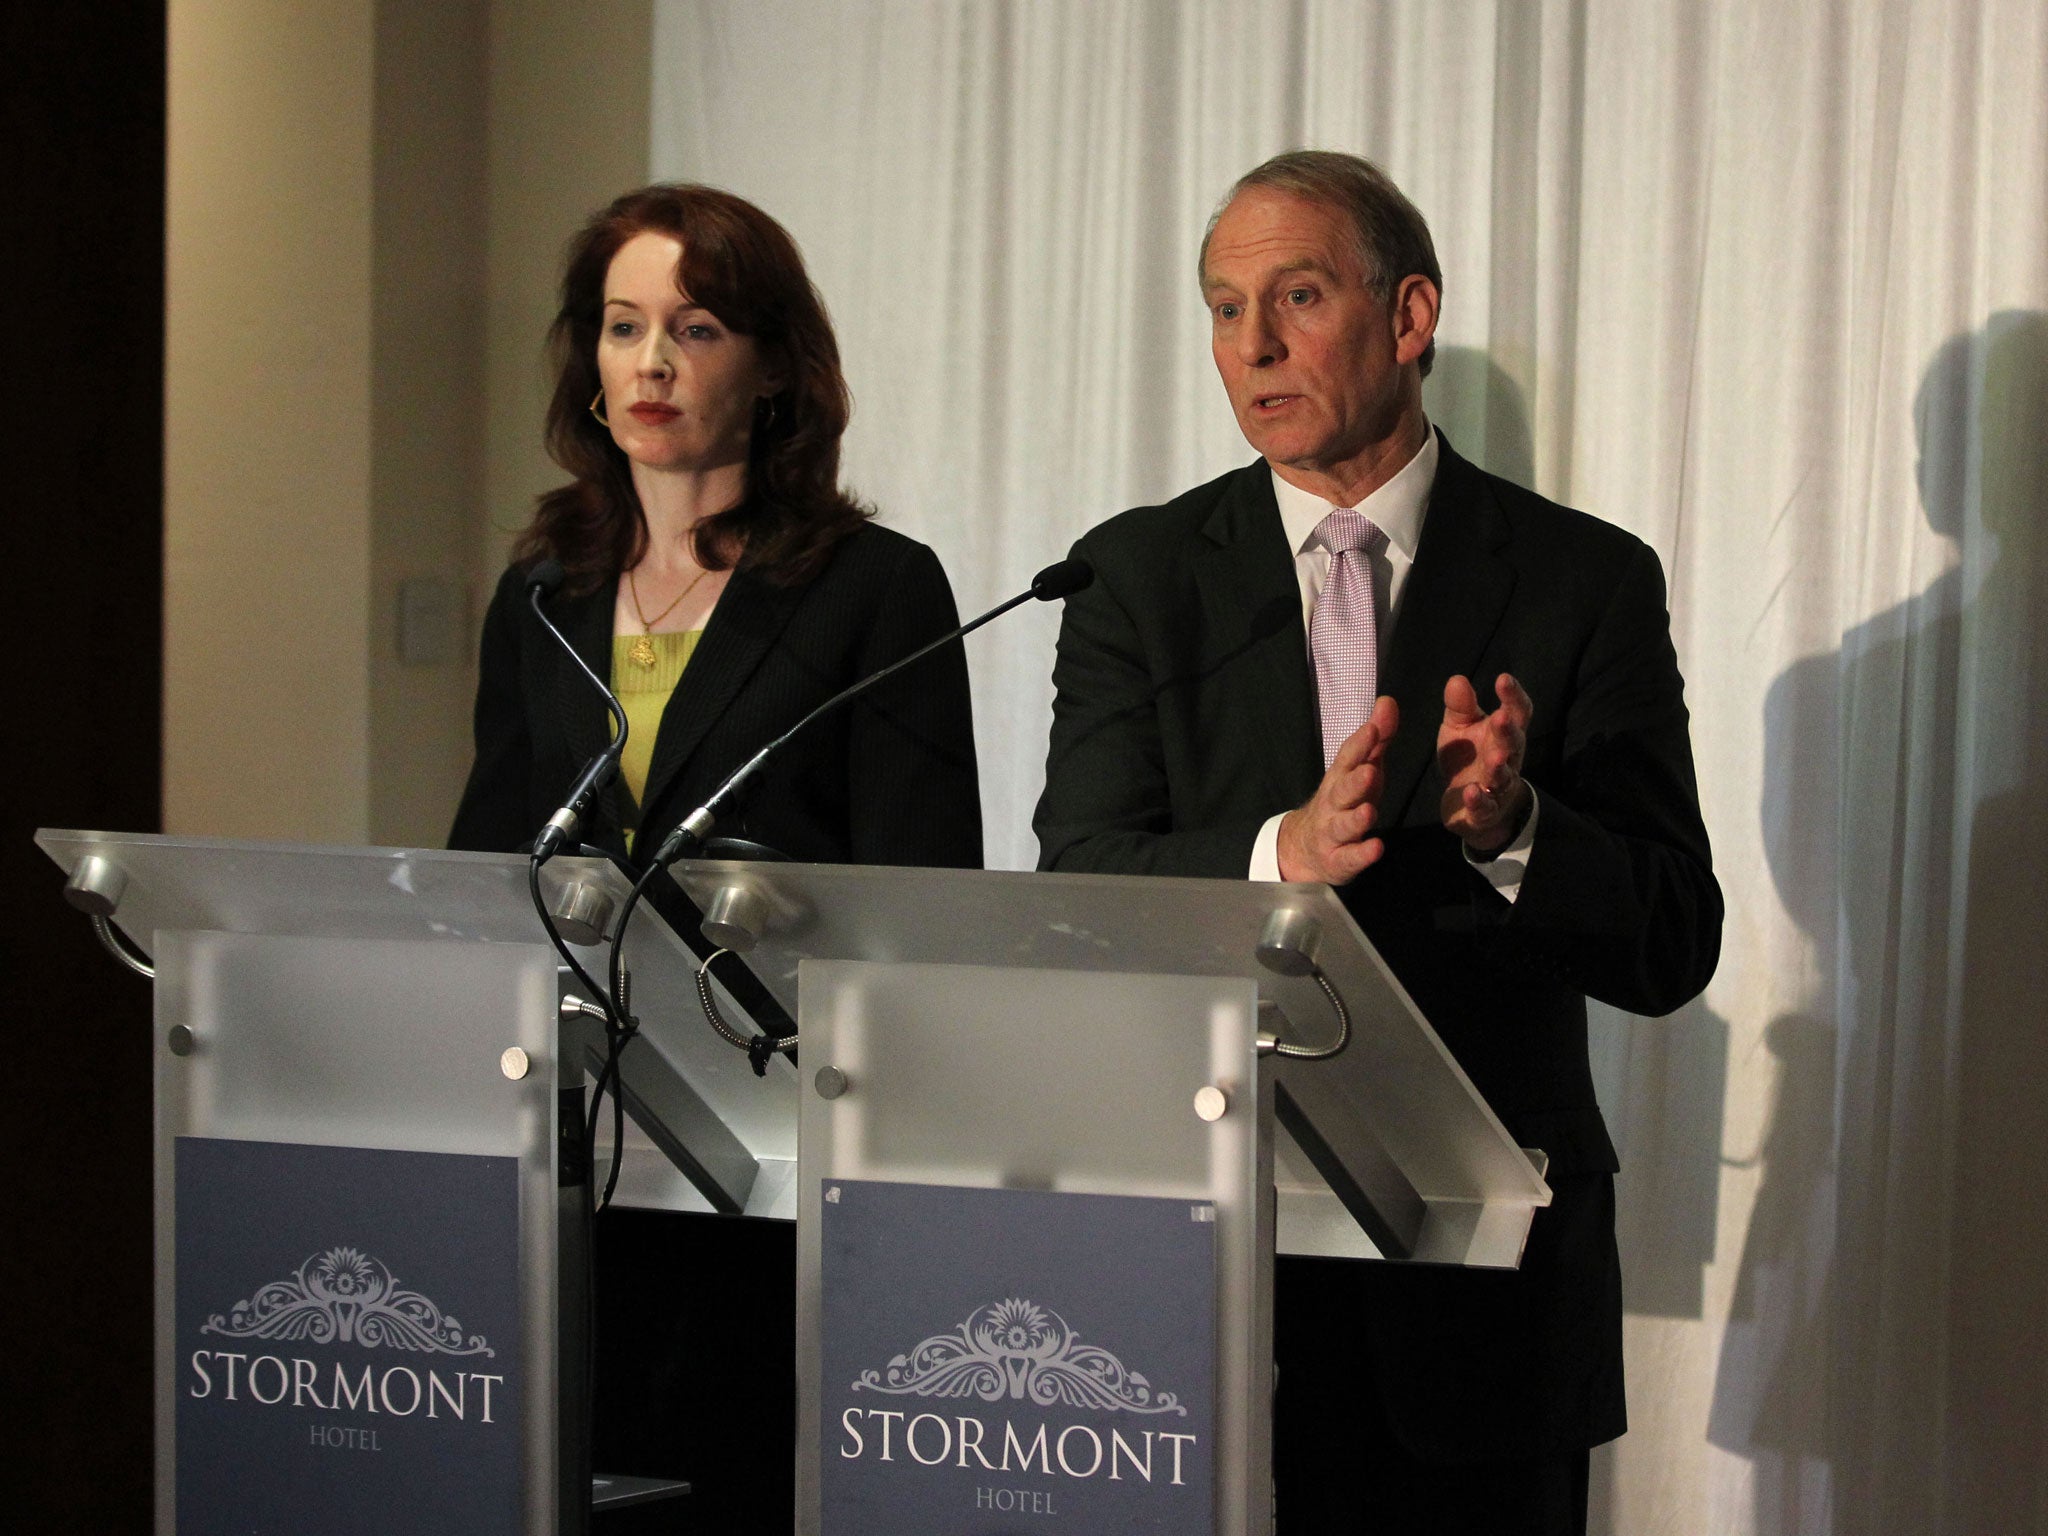 Former US diplomat Richard Haass and co-chair Meghan O'Sullivan speak at the Stormont hotel in Belfast. Overnight talks failed to reach any agreements